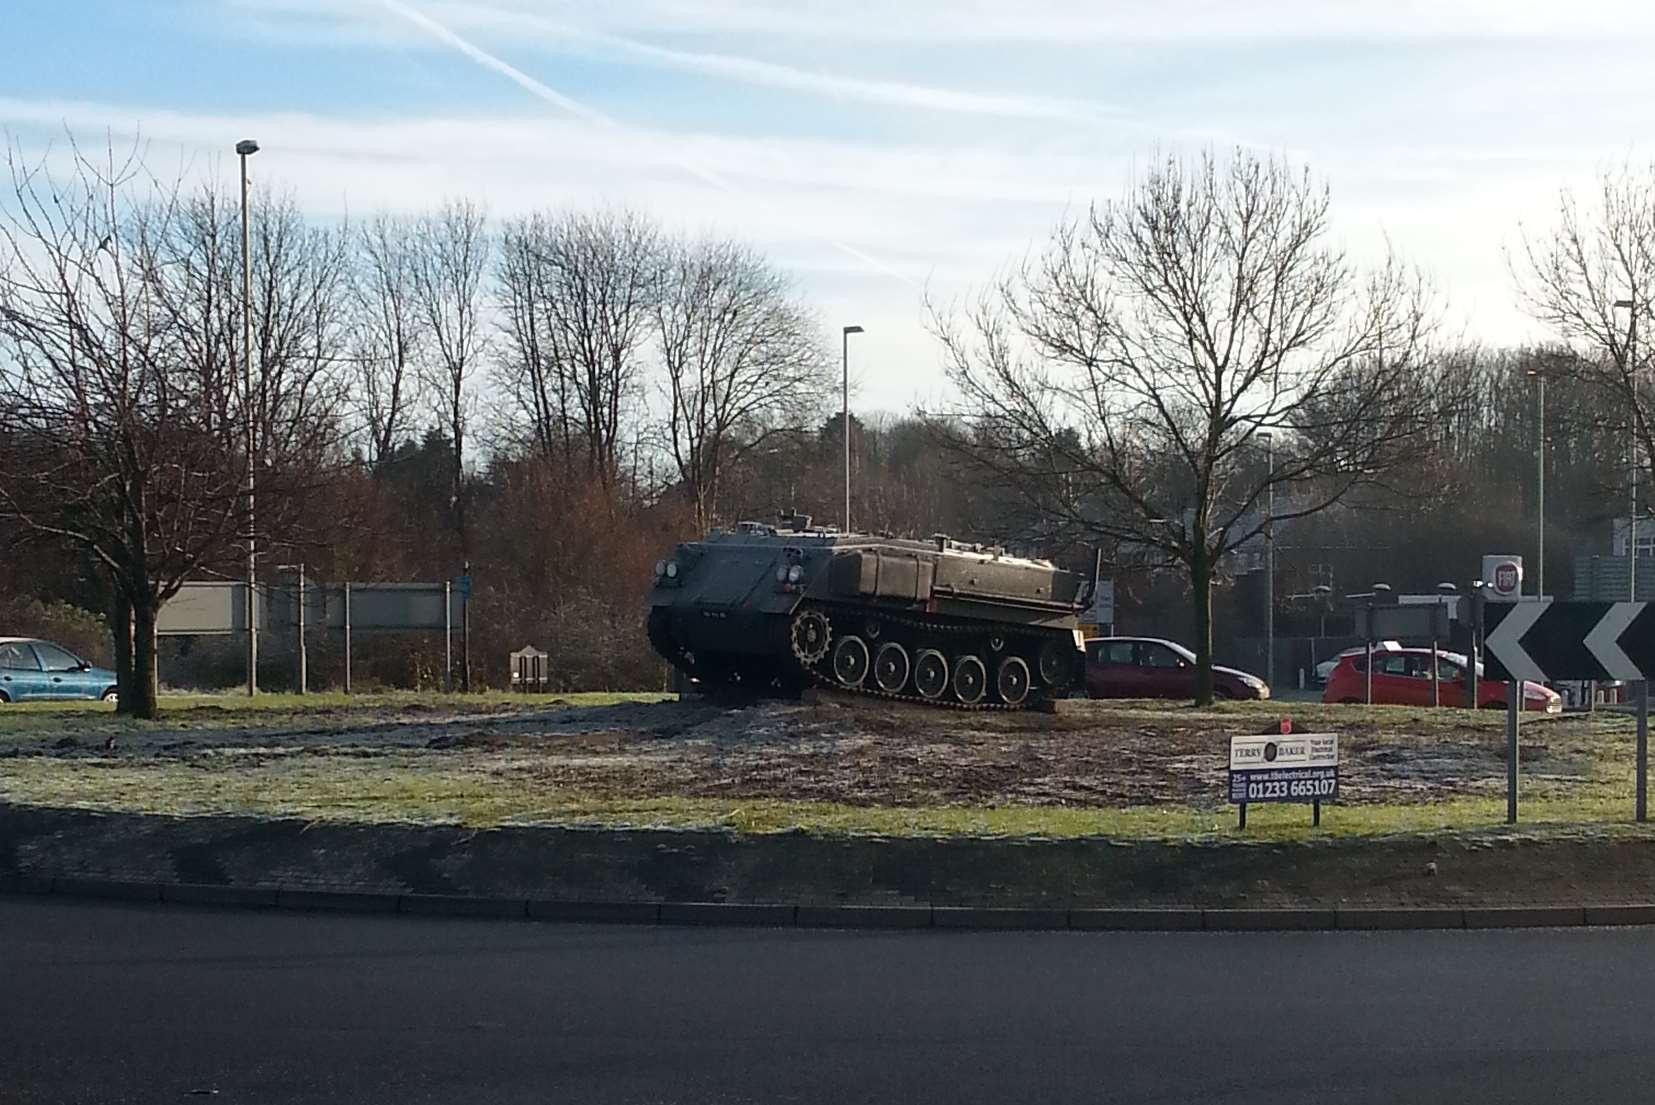 Ashford's 'tank roundabout' with the vehicle back in place after restoration